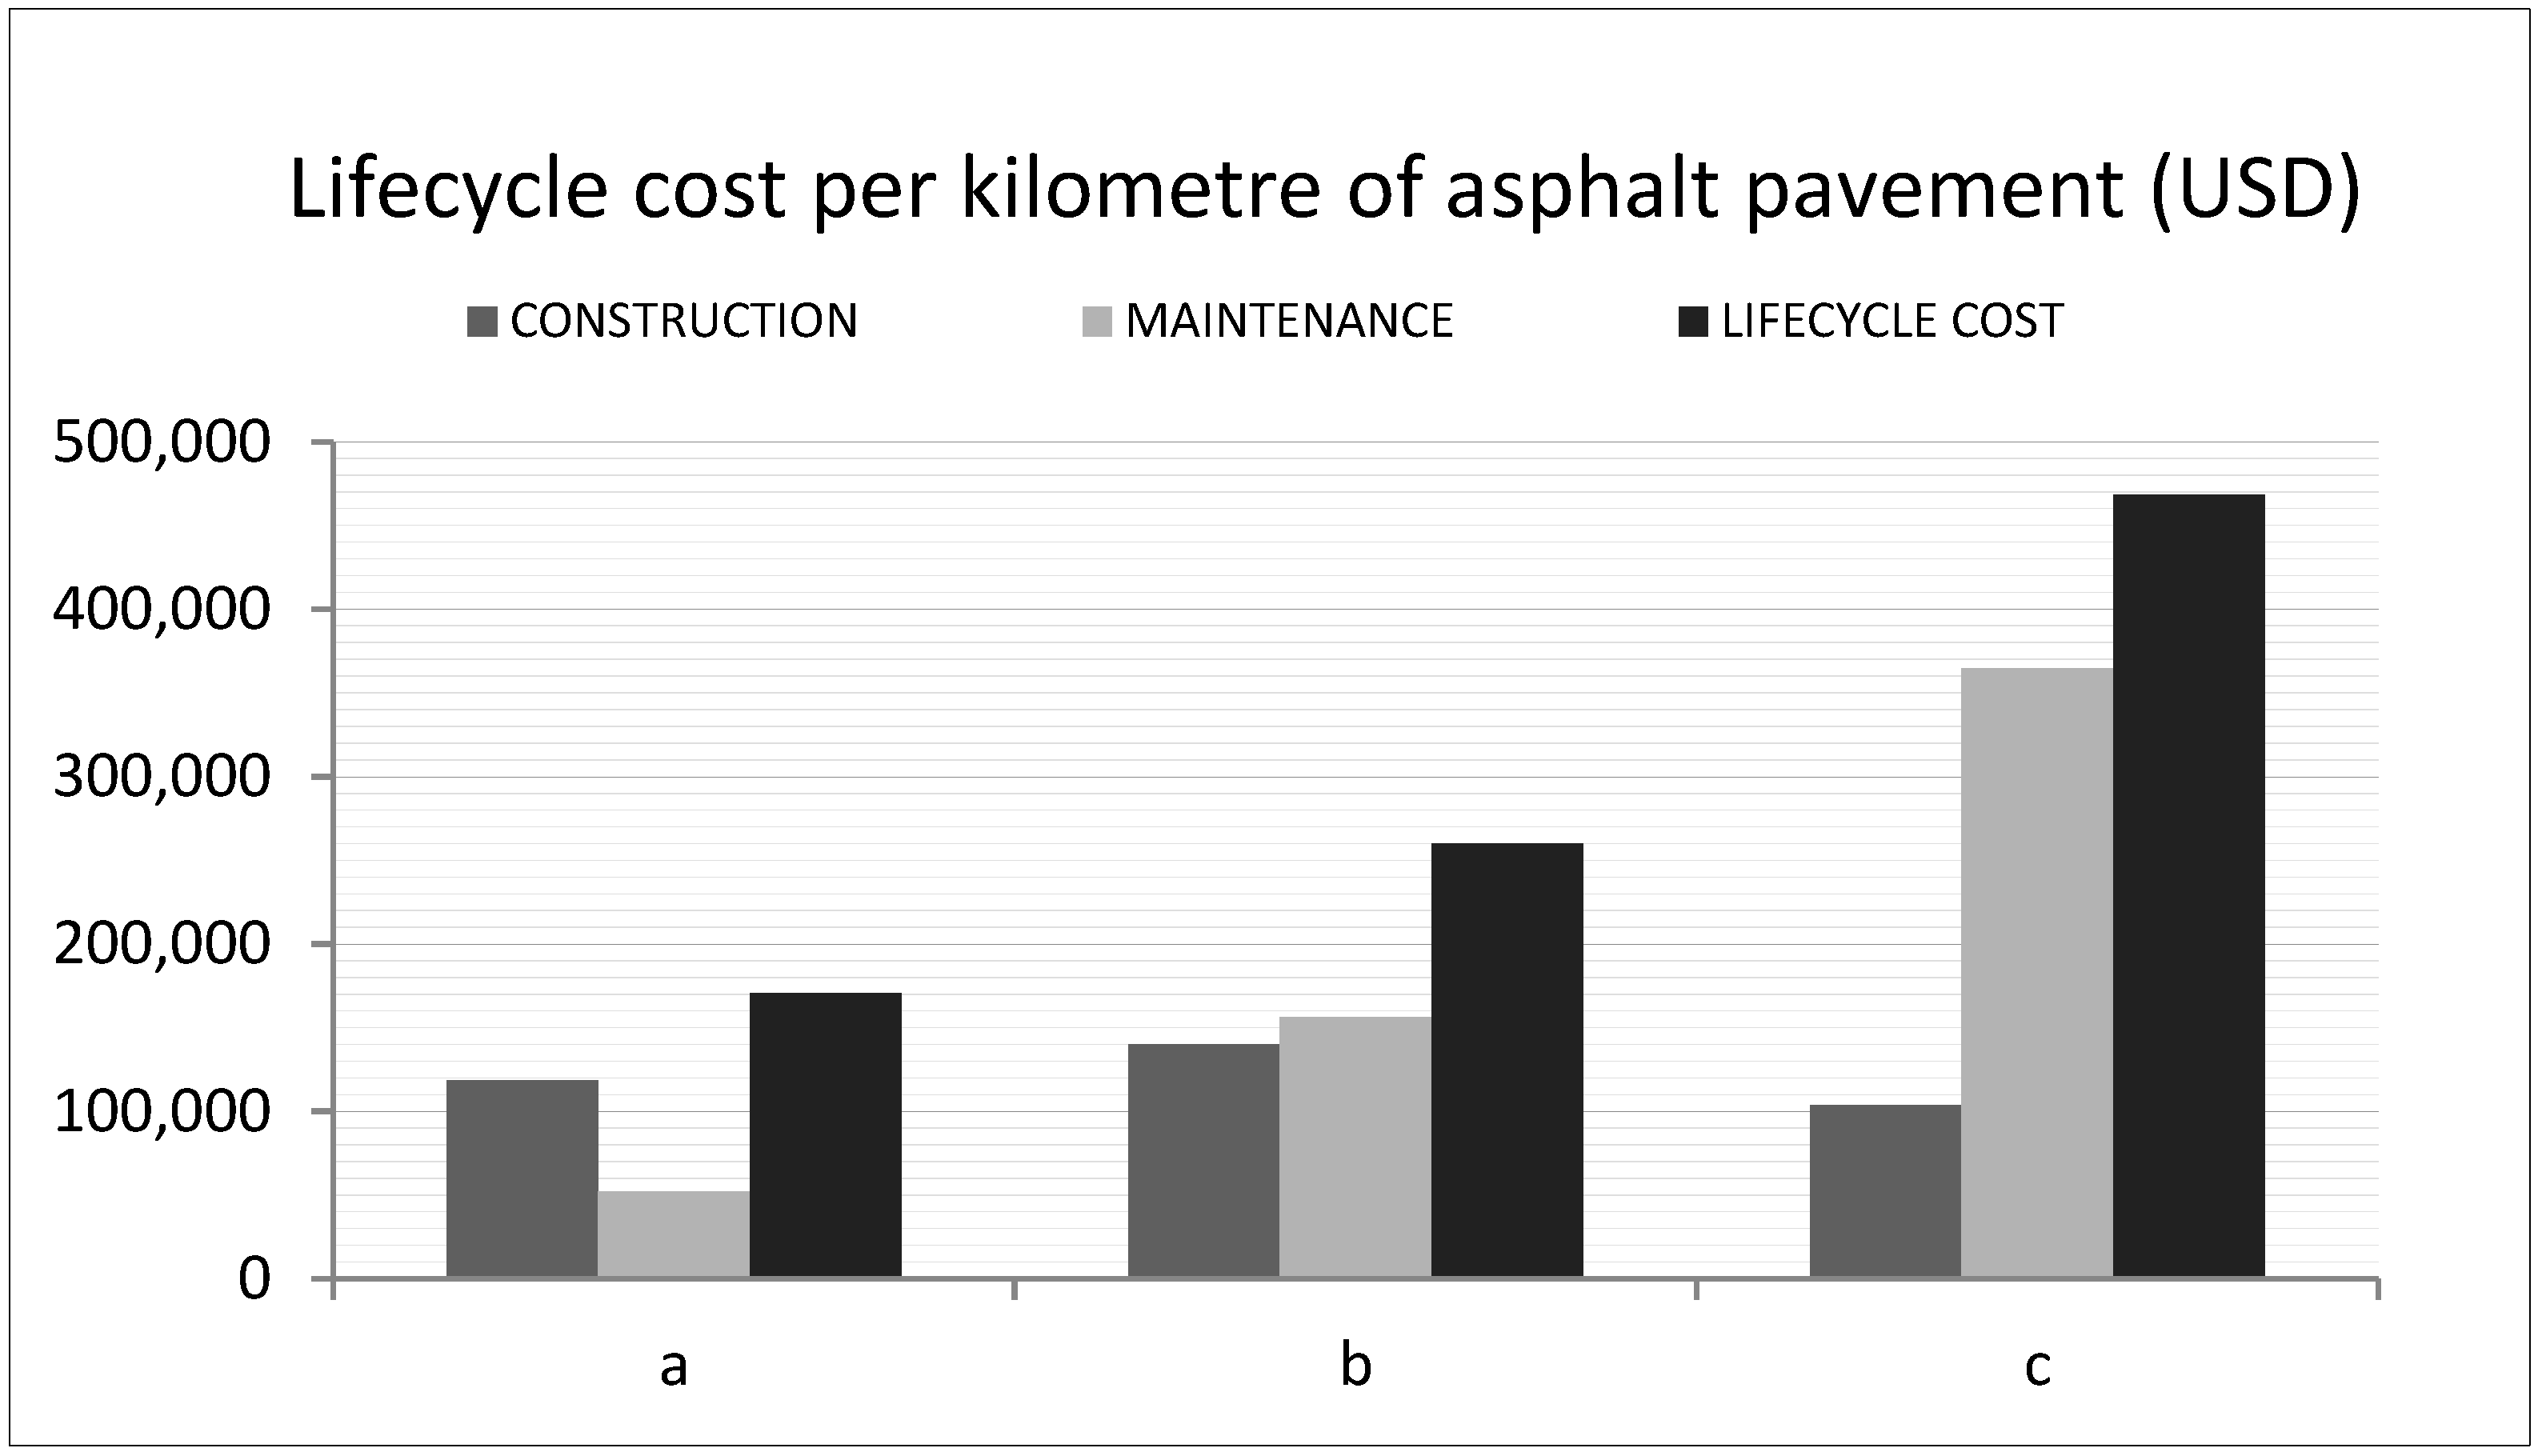 Review of porous asphalt pavements in cold regions: the state of practice  and case study repository in design, construction, and maintenance, Journal of Infrastructure Preservation and Resilience